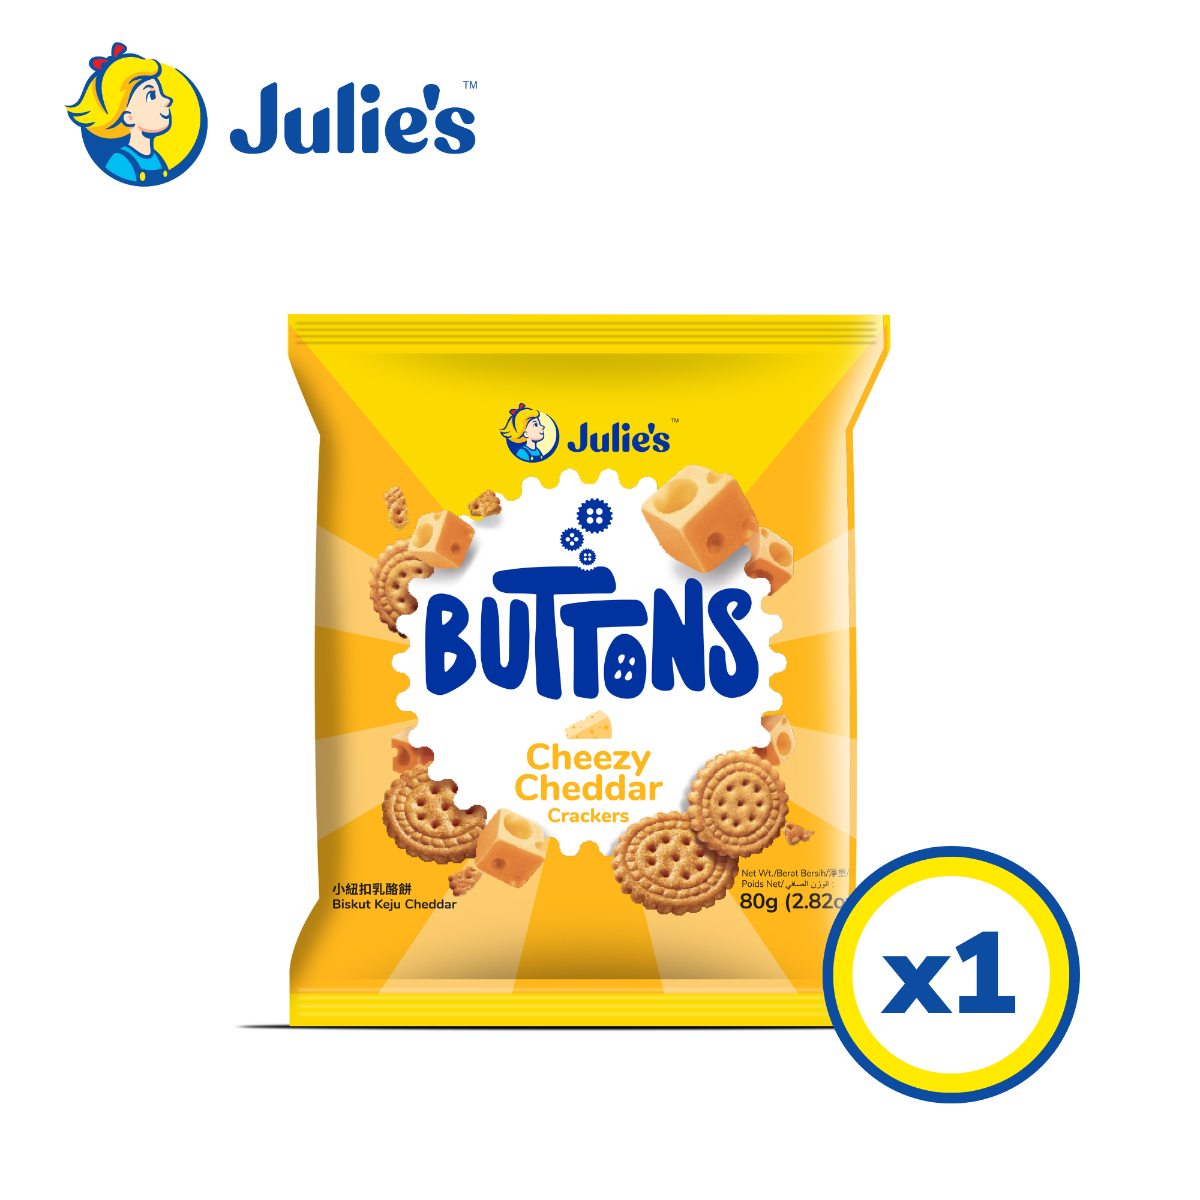 julie_s_buttons_cheezy_cheddar_crackers_80g_v1